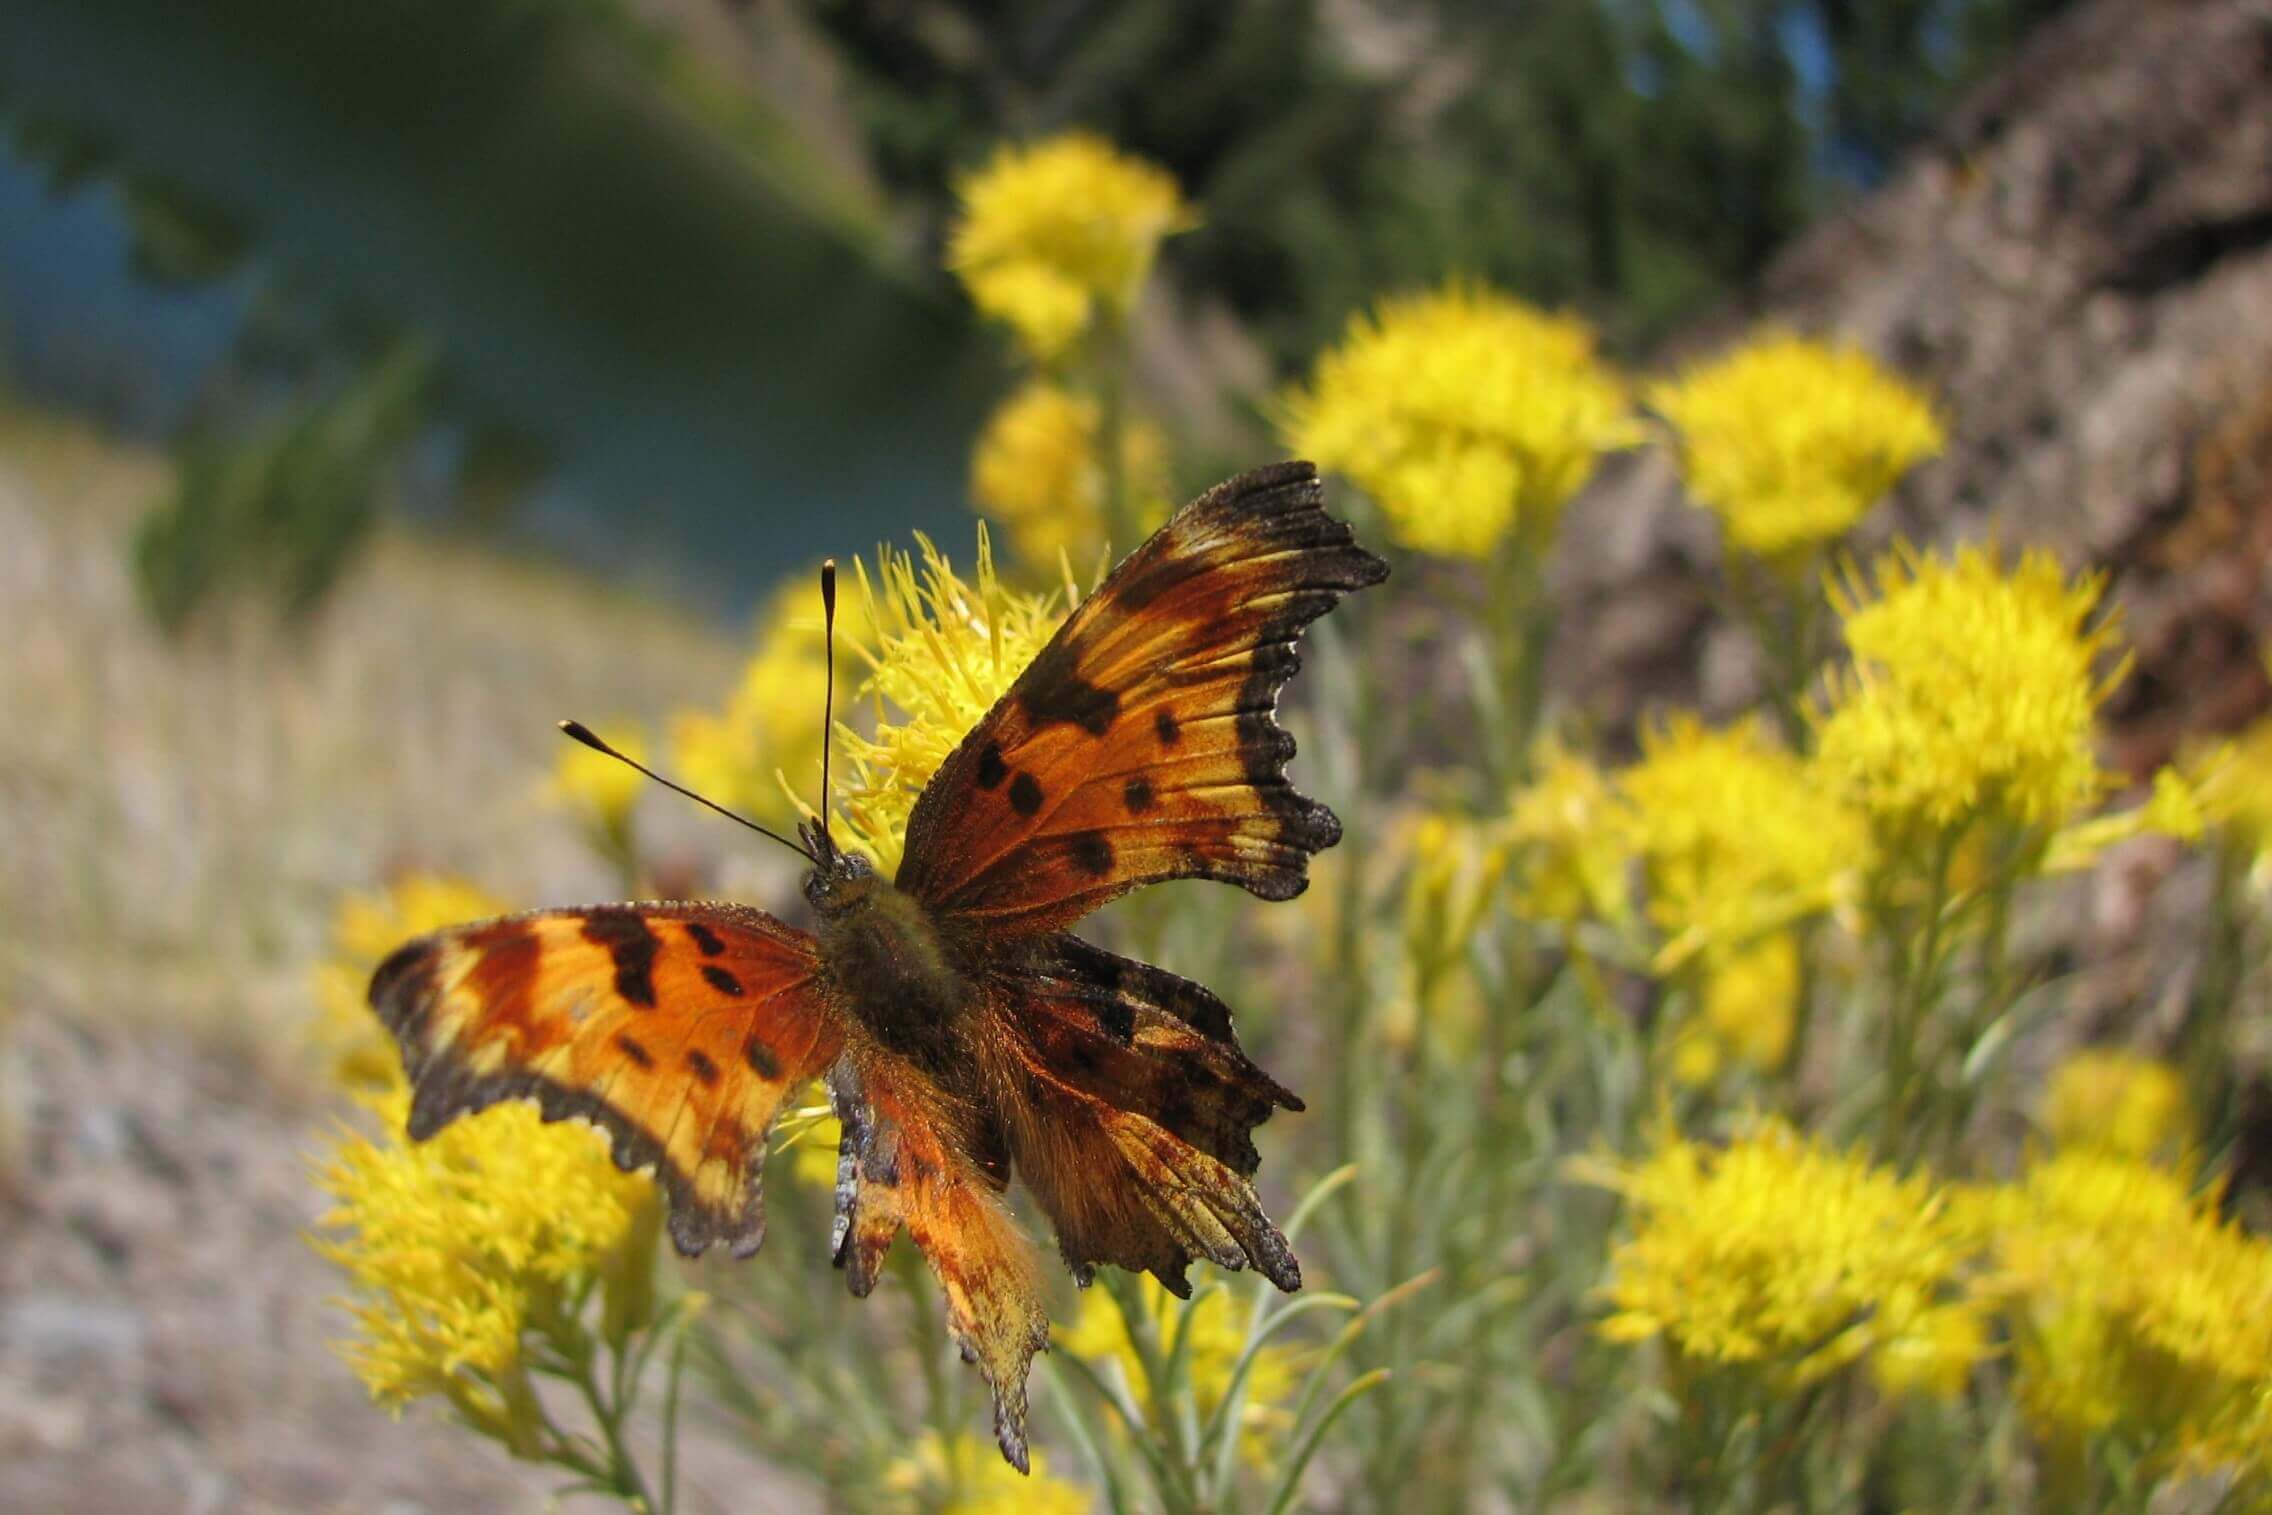 A photo of an orange and brown butterfly perched on yellow flowers with its wings spread.